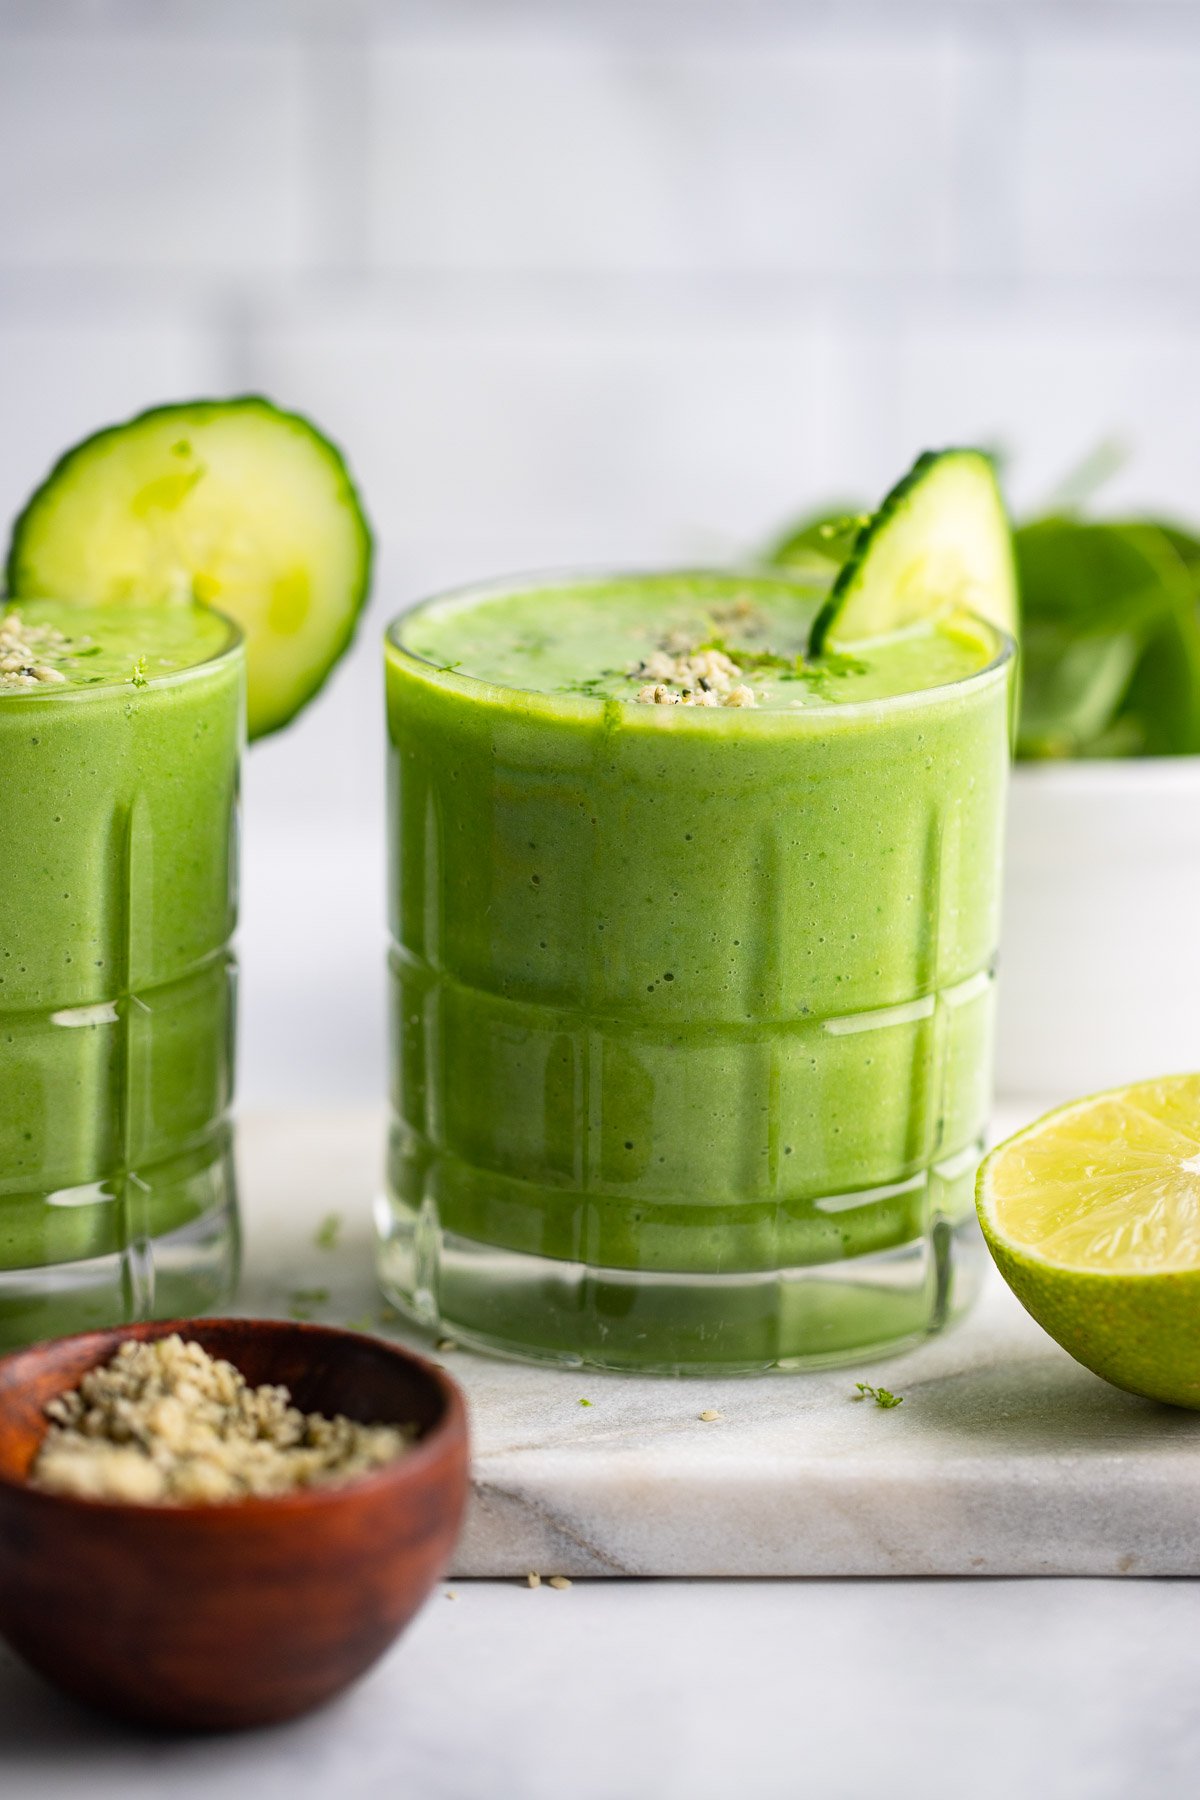 pineapple cucumber smoothie in glass garnished with slice of cucumber.